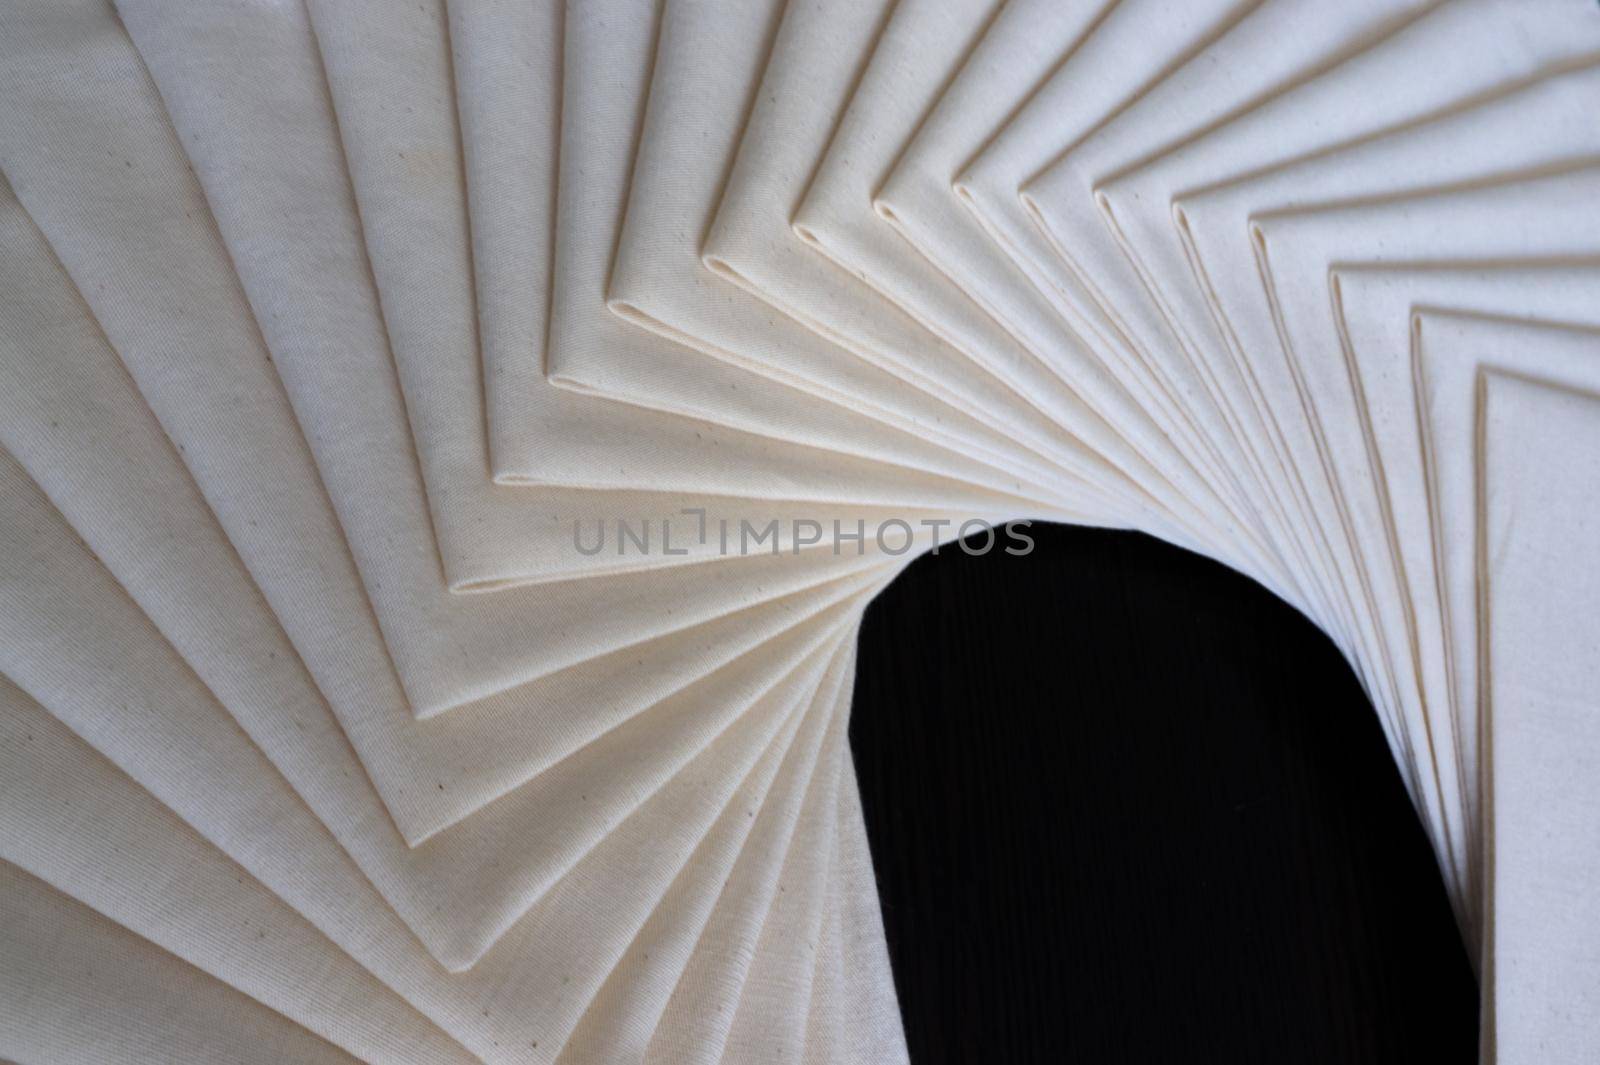 White Fabric folded of stacked . Fabric texture background by Hepjam